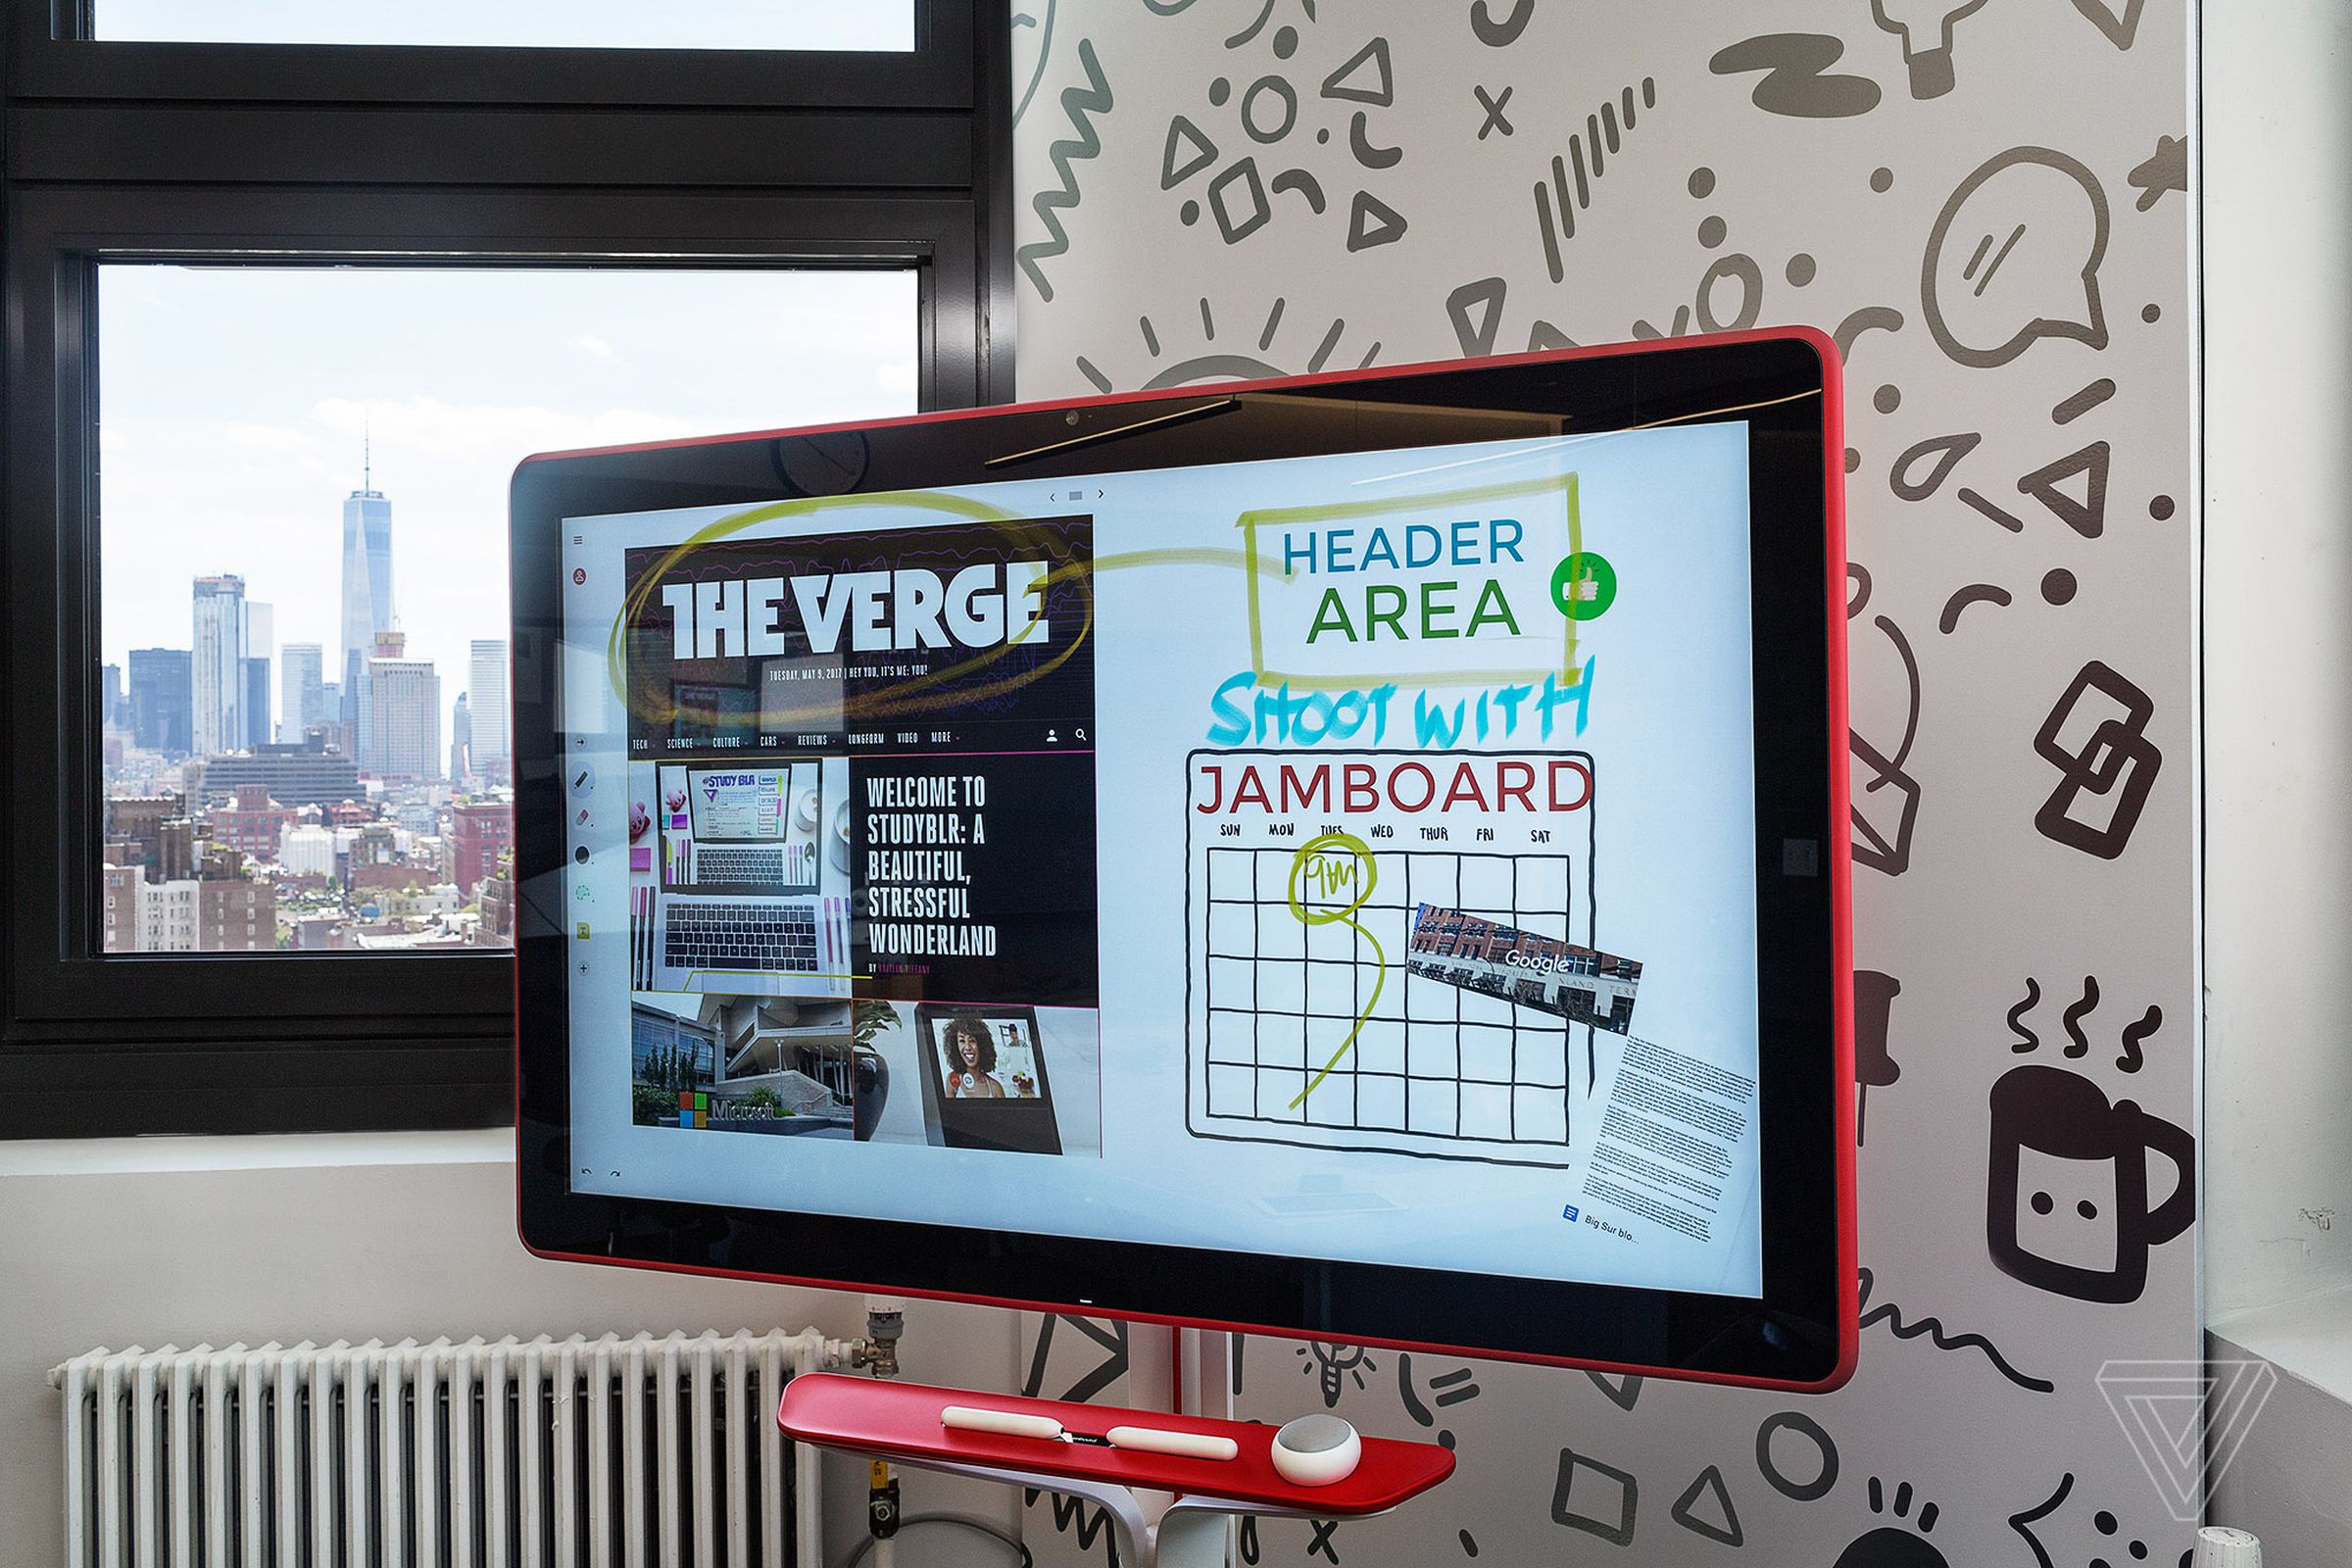 A Google Jamboard screen on a rod stand with styluses and the NYC skyline in the background outside the windows.